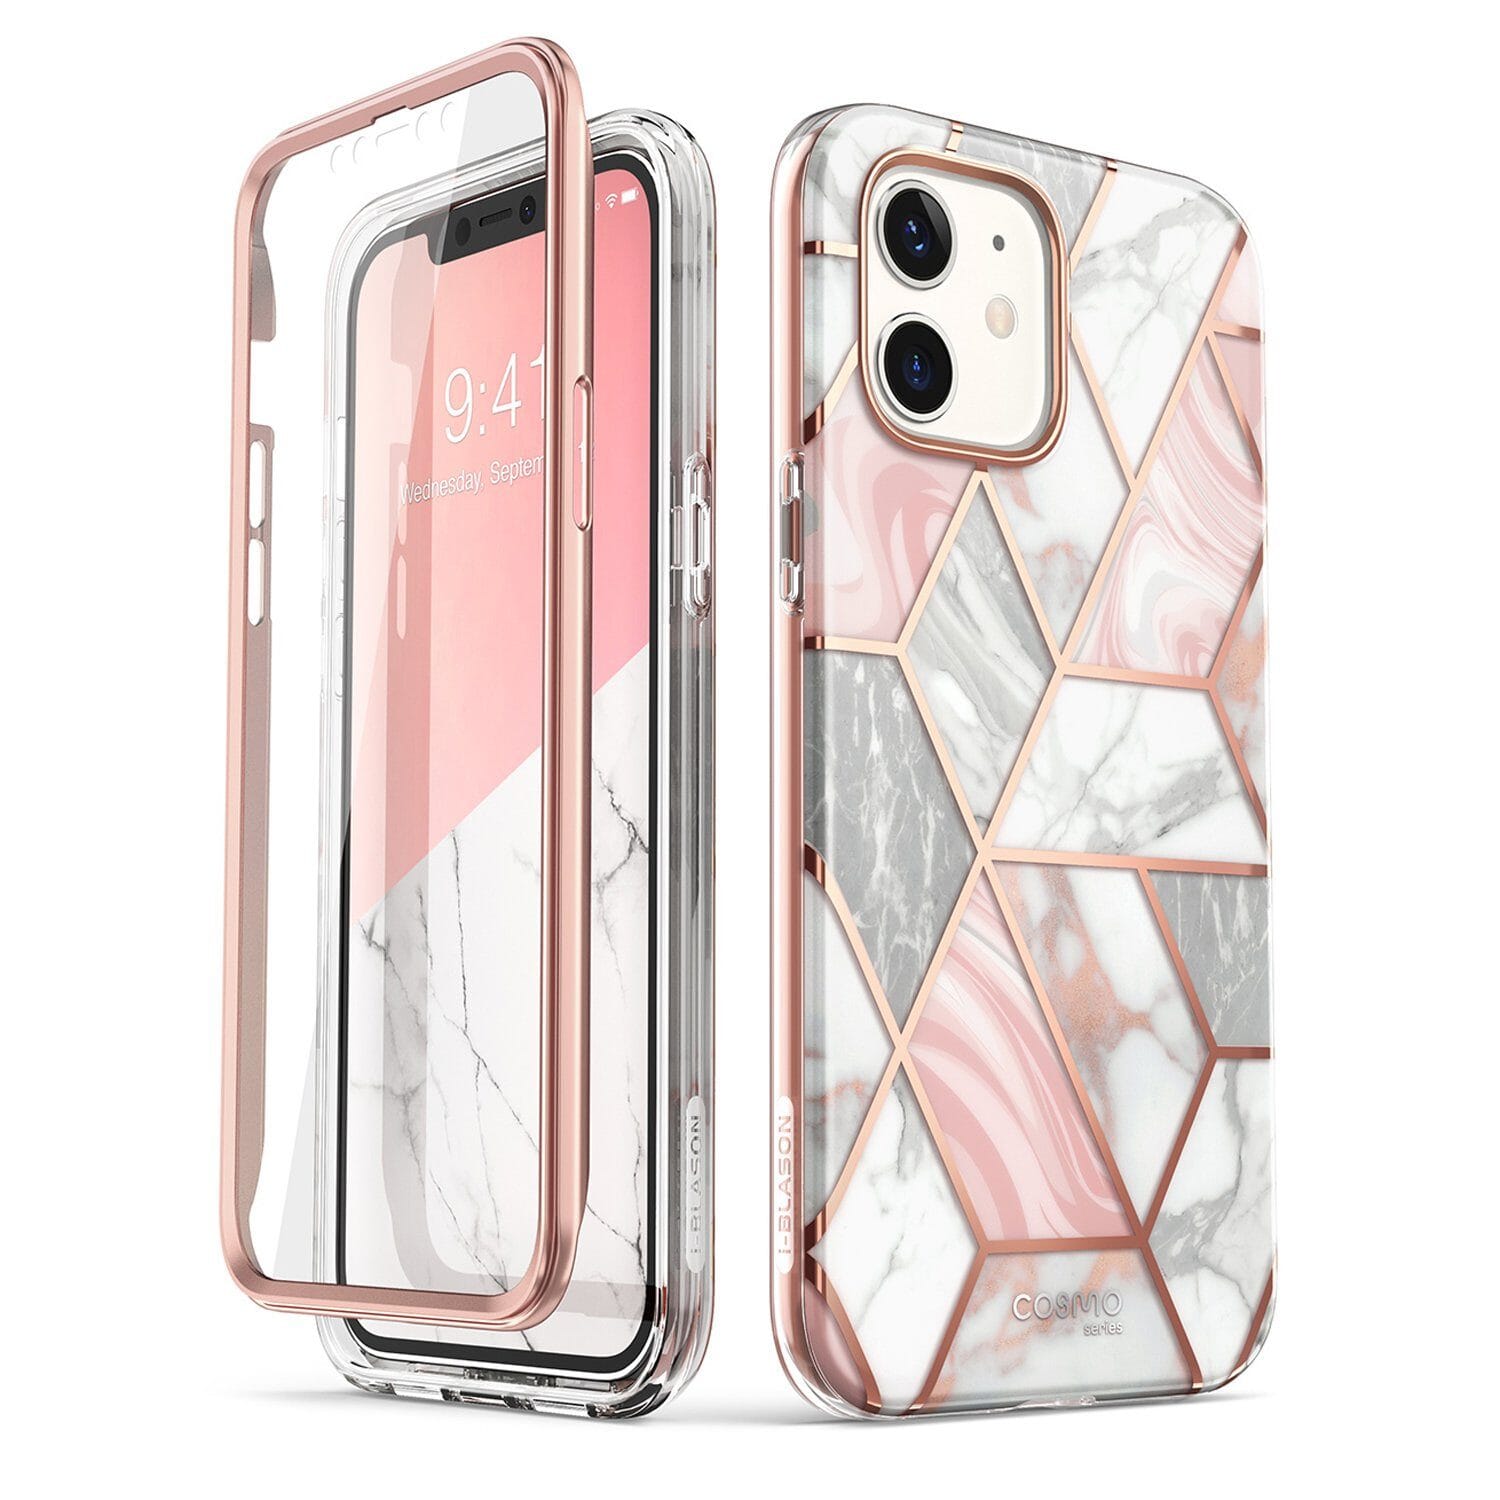 i-Blason Cosmo Series Slim Full-Body Stylish Protective Case for iPhone 12 Series (2020)(With Build-in Screen Protector) iPhone 12 Series i-Blason Marble iPhone 12 Pro Max 6.7" 